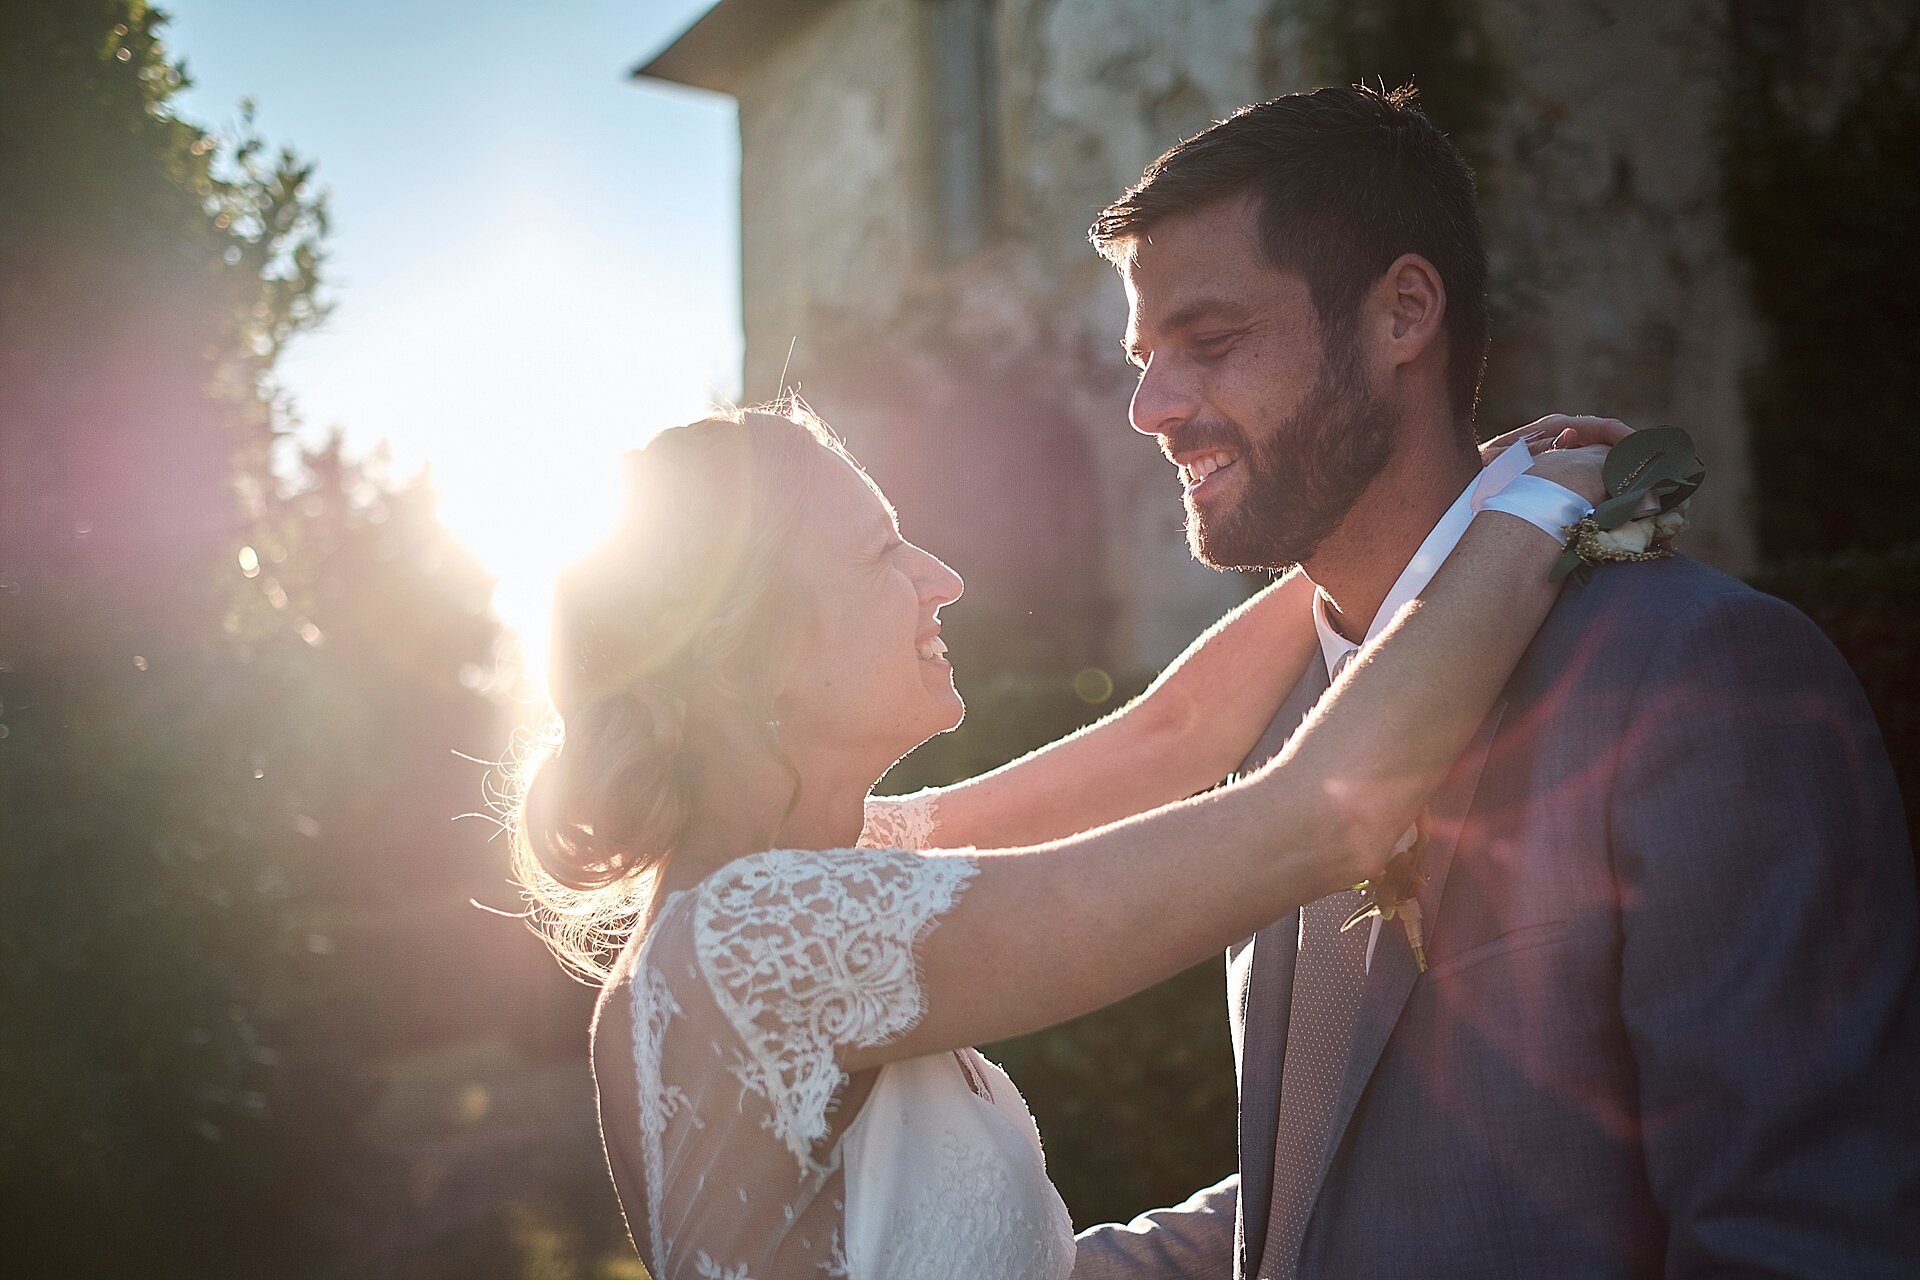  Superb summer wedding at Villa Catignano, in the Chianti hills outside Siena. A very beautiful place where the bride and groom carried out the getting ready. Picnic style aperitif in the garden, and then dinner organized by Lodovichi served on imper